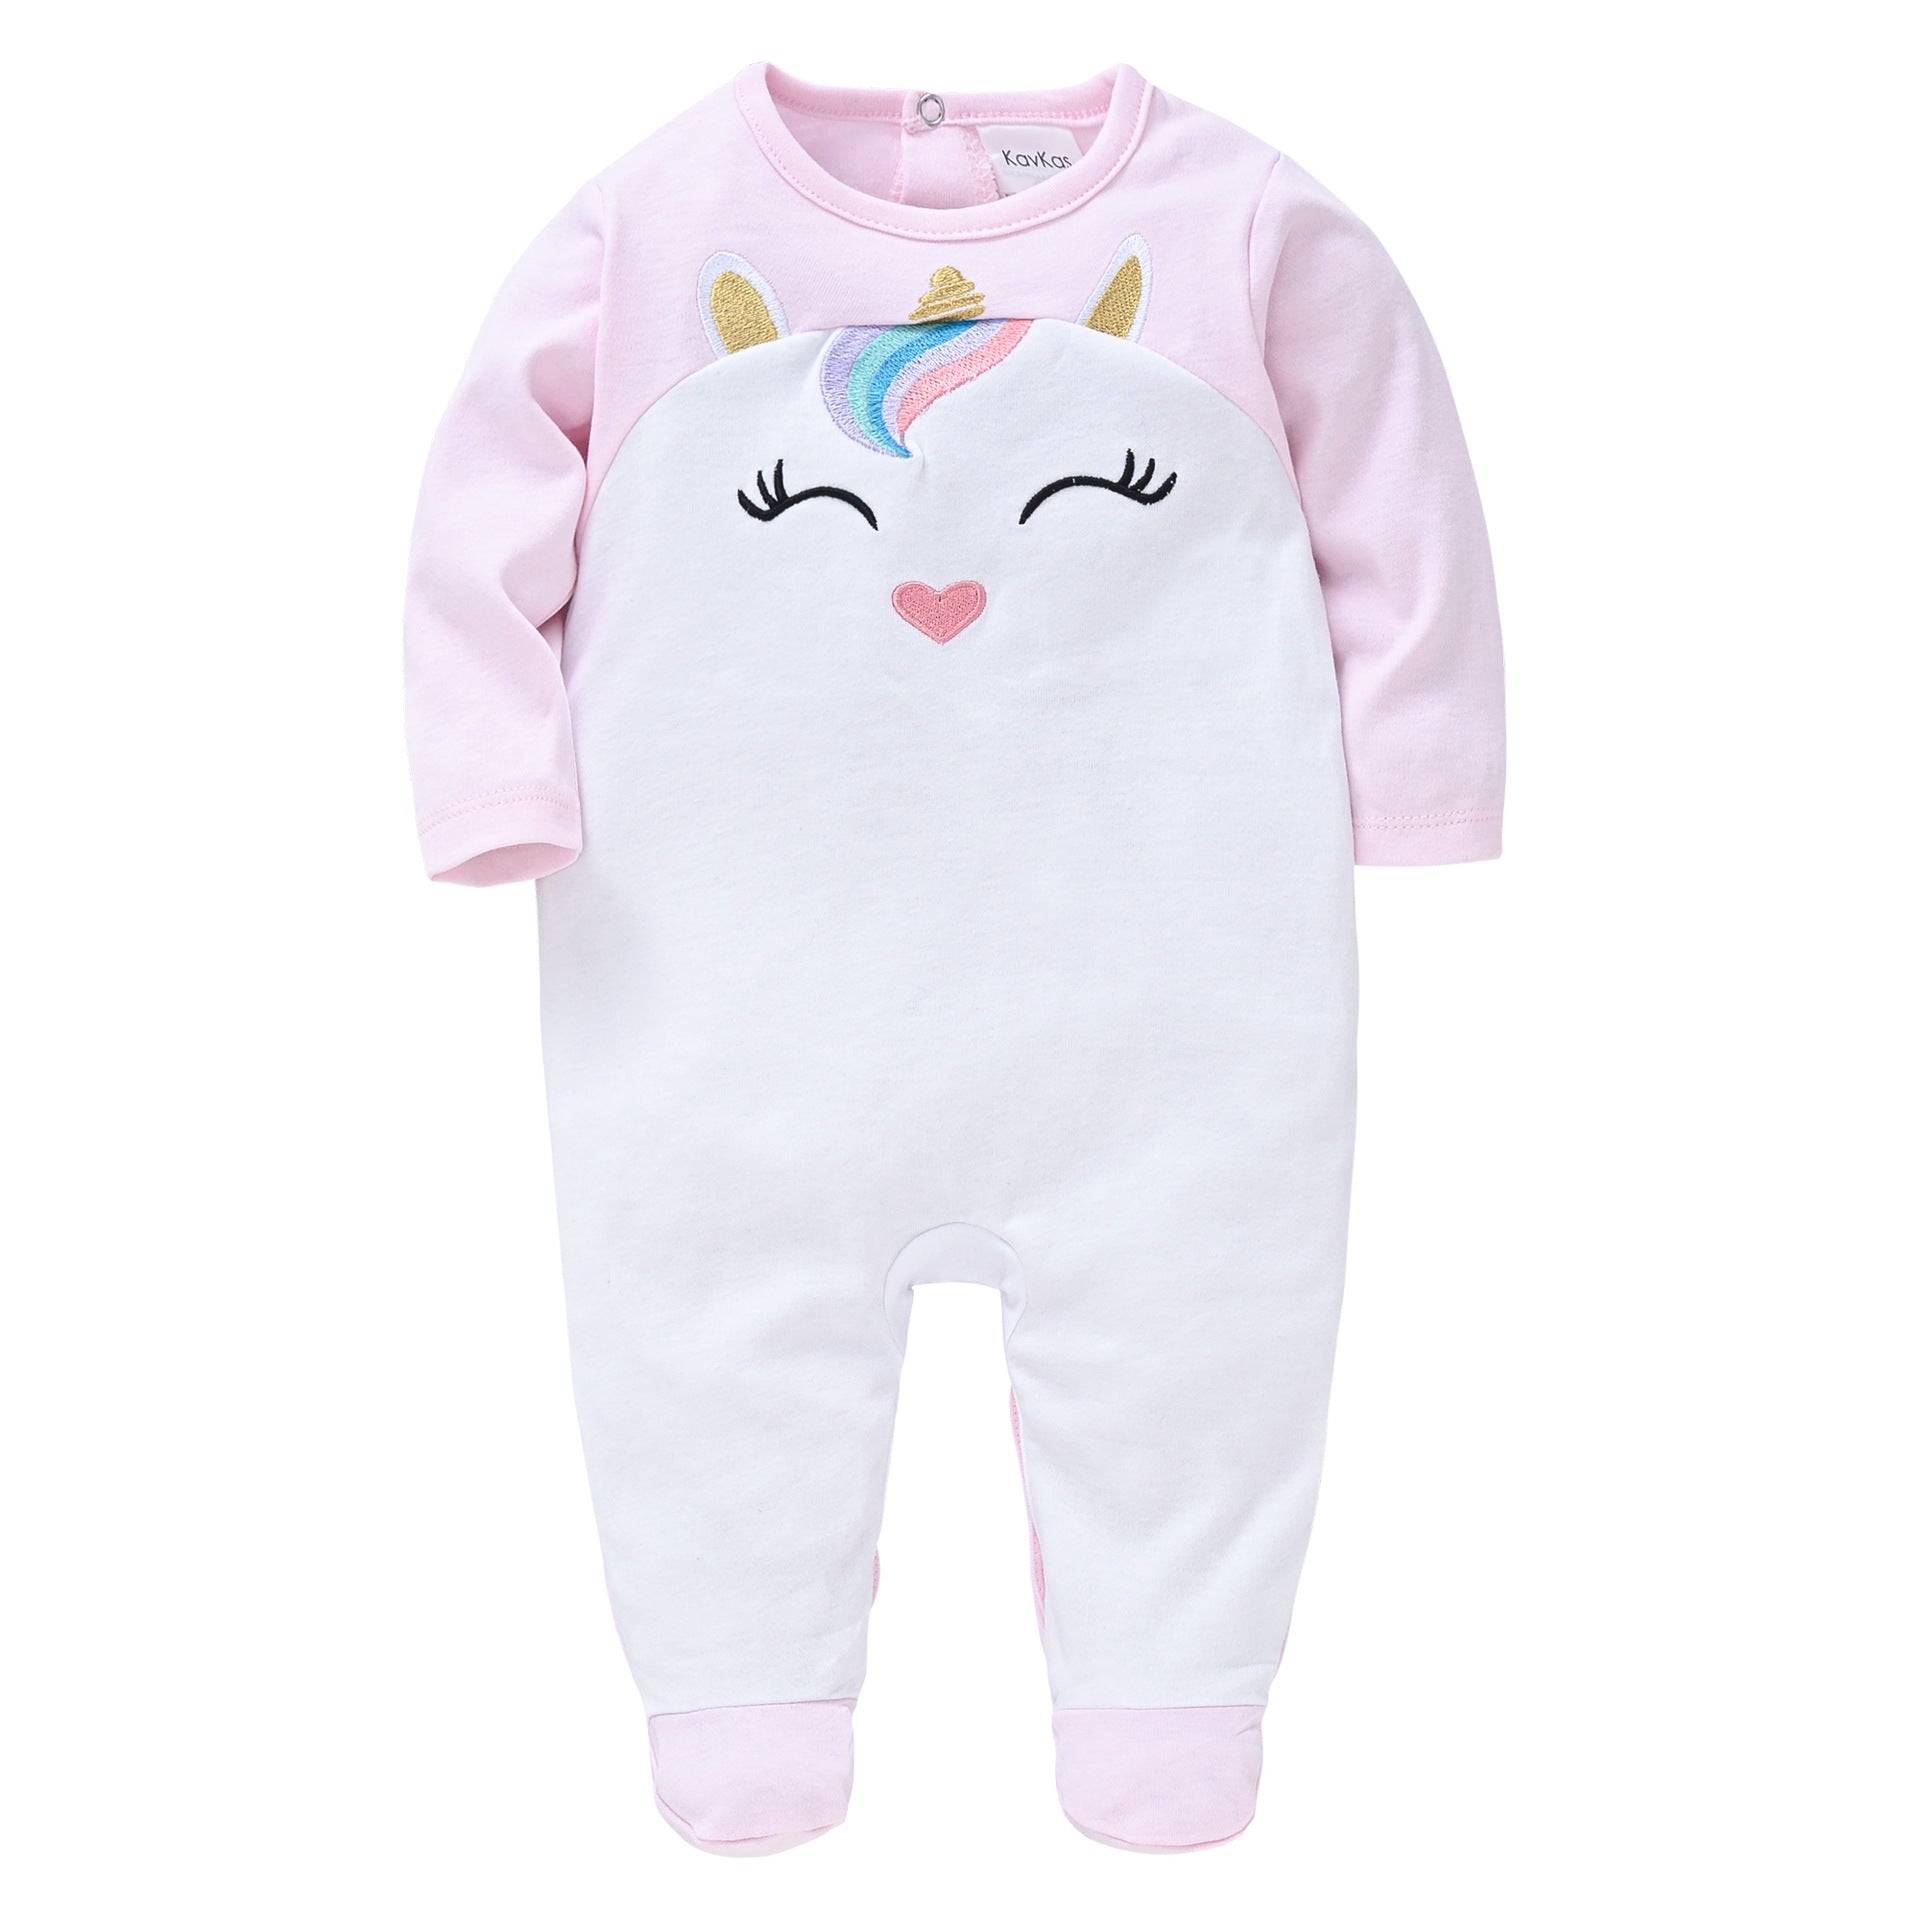 Cute and Cozy Spring and Autumn Baby One-piece